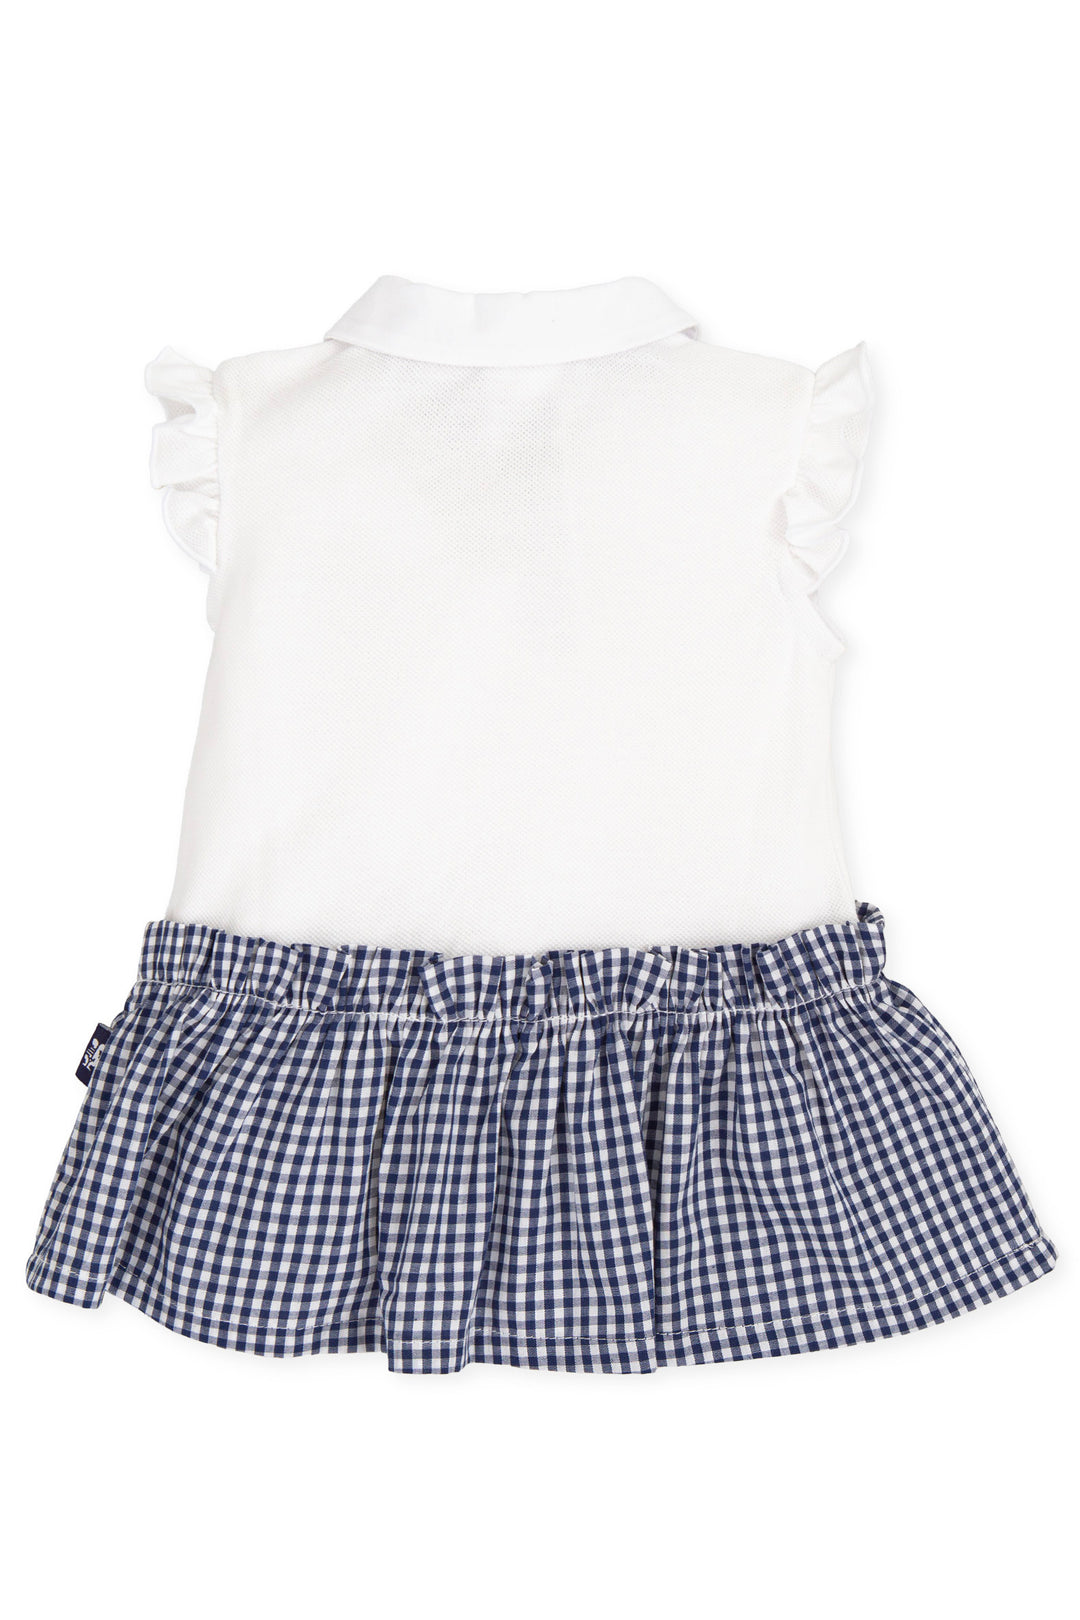 Tutto Piccolo "Lyra" Navy Gingham Tennis Dress | Millie and John